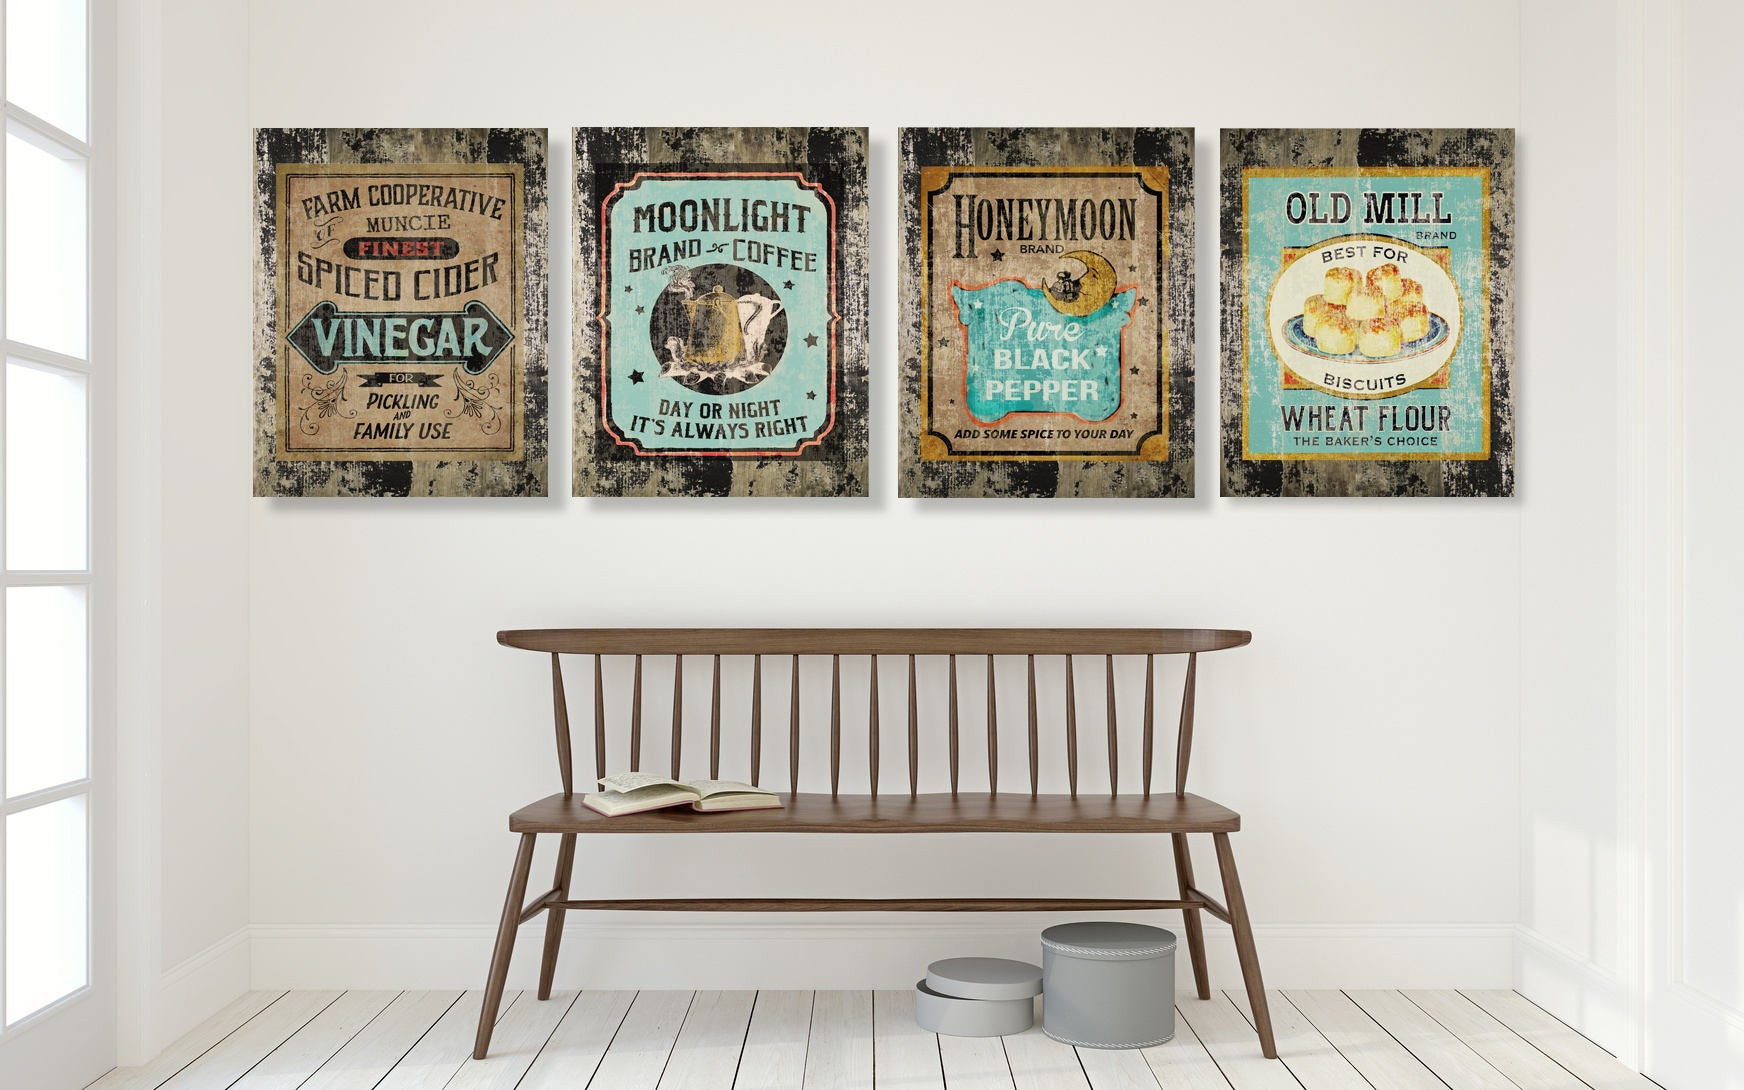 Rustic Kitchen Wall Art
 Teal Farmhouse Kitchen Decor Country Decor Rustic Wall Art